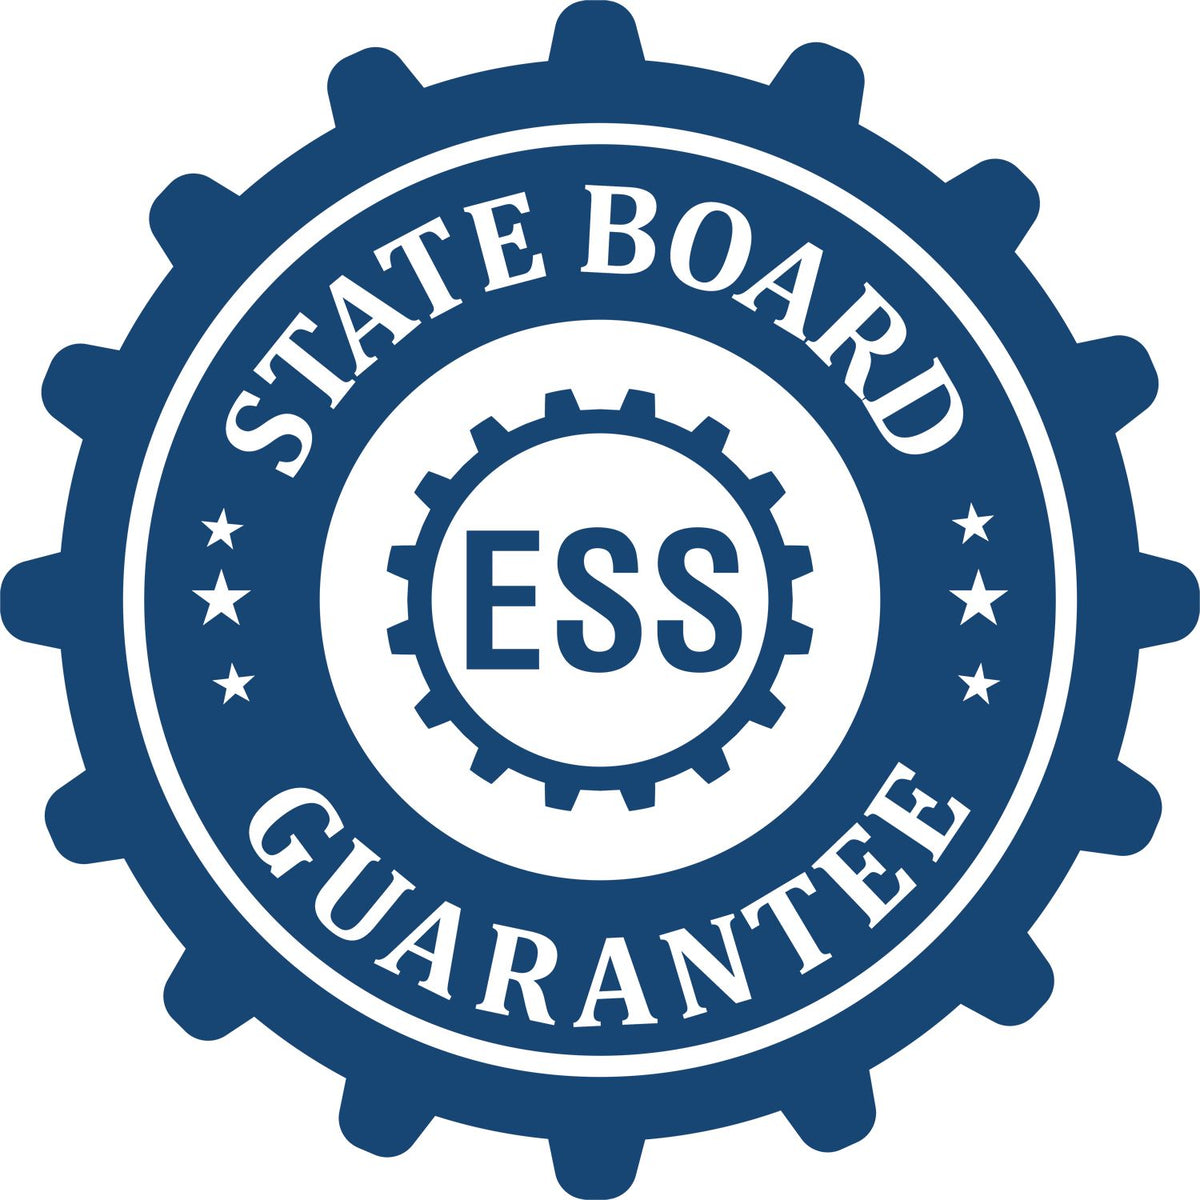 An emblem in a gear shape illustrating a state board guarantee for the New Jersey Landscape Architectural Seal Stamp product.